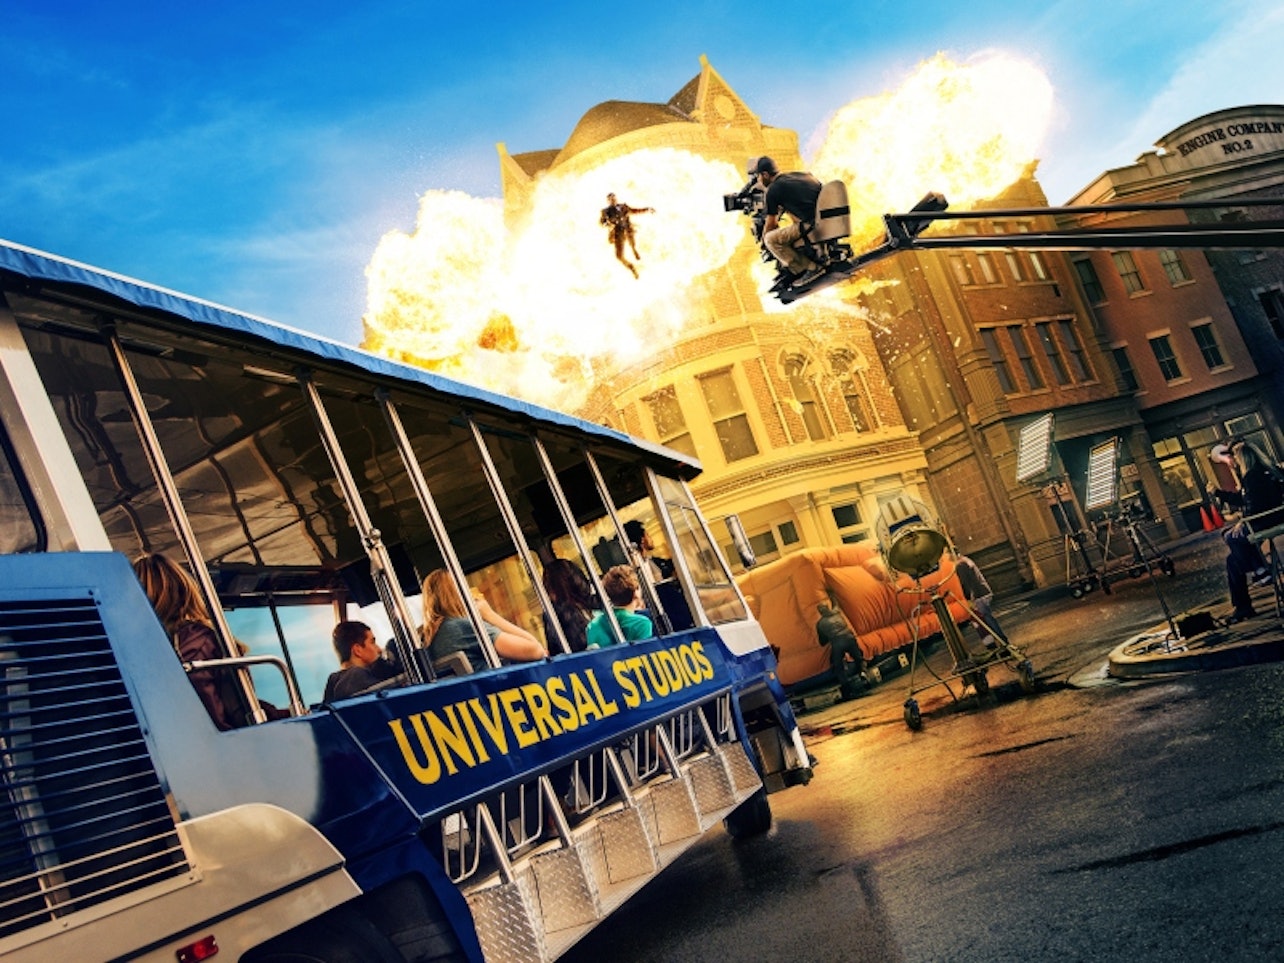 Universal Studios Hollywood - Accommodations in Los Angeles